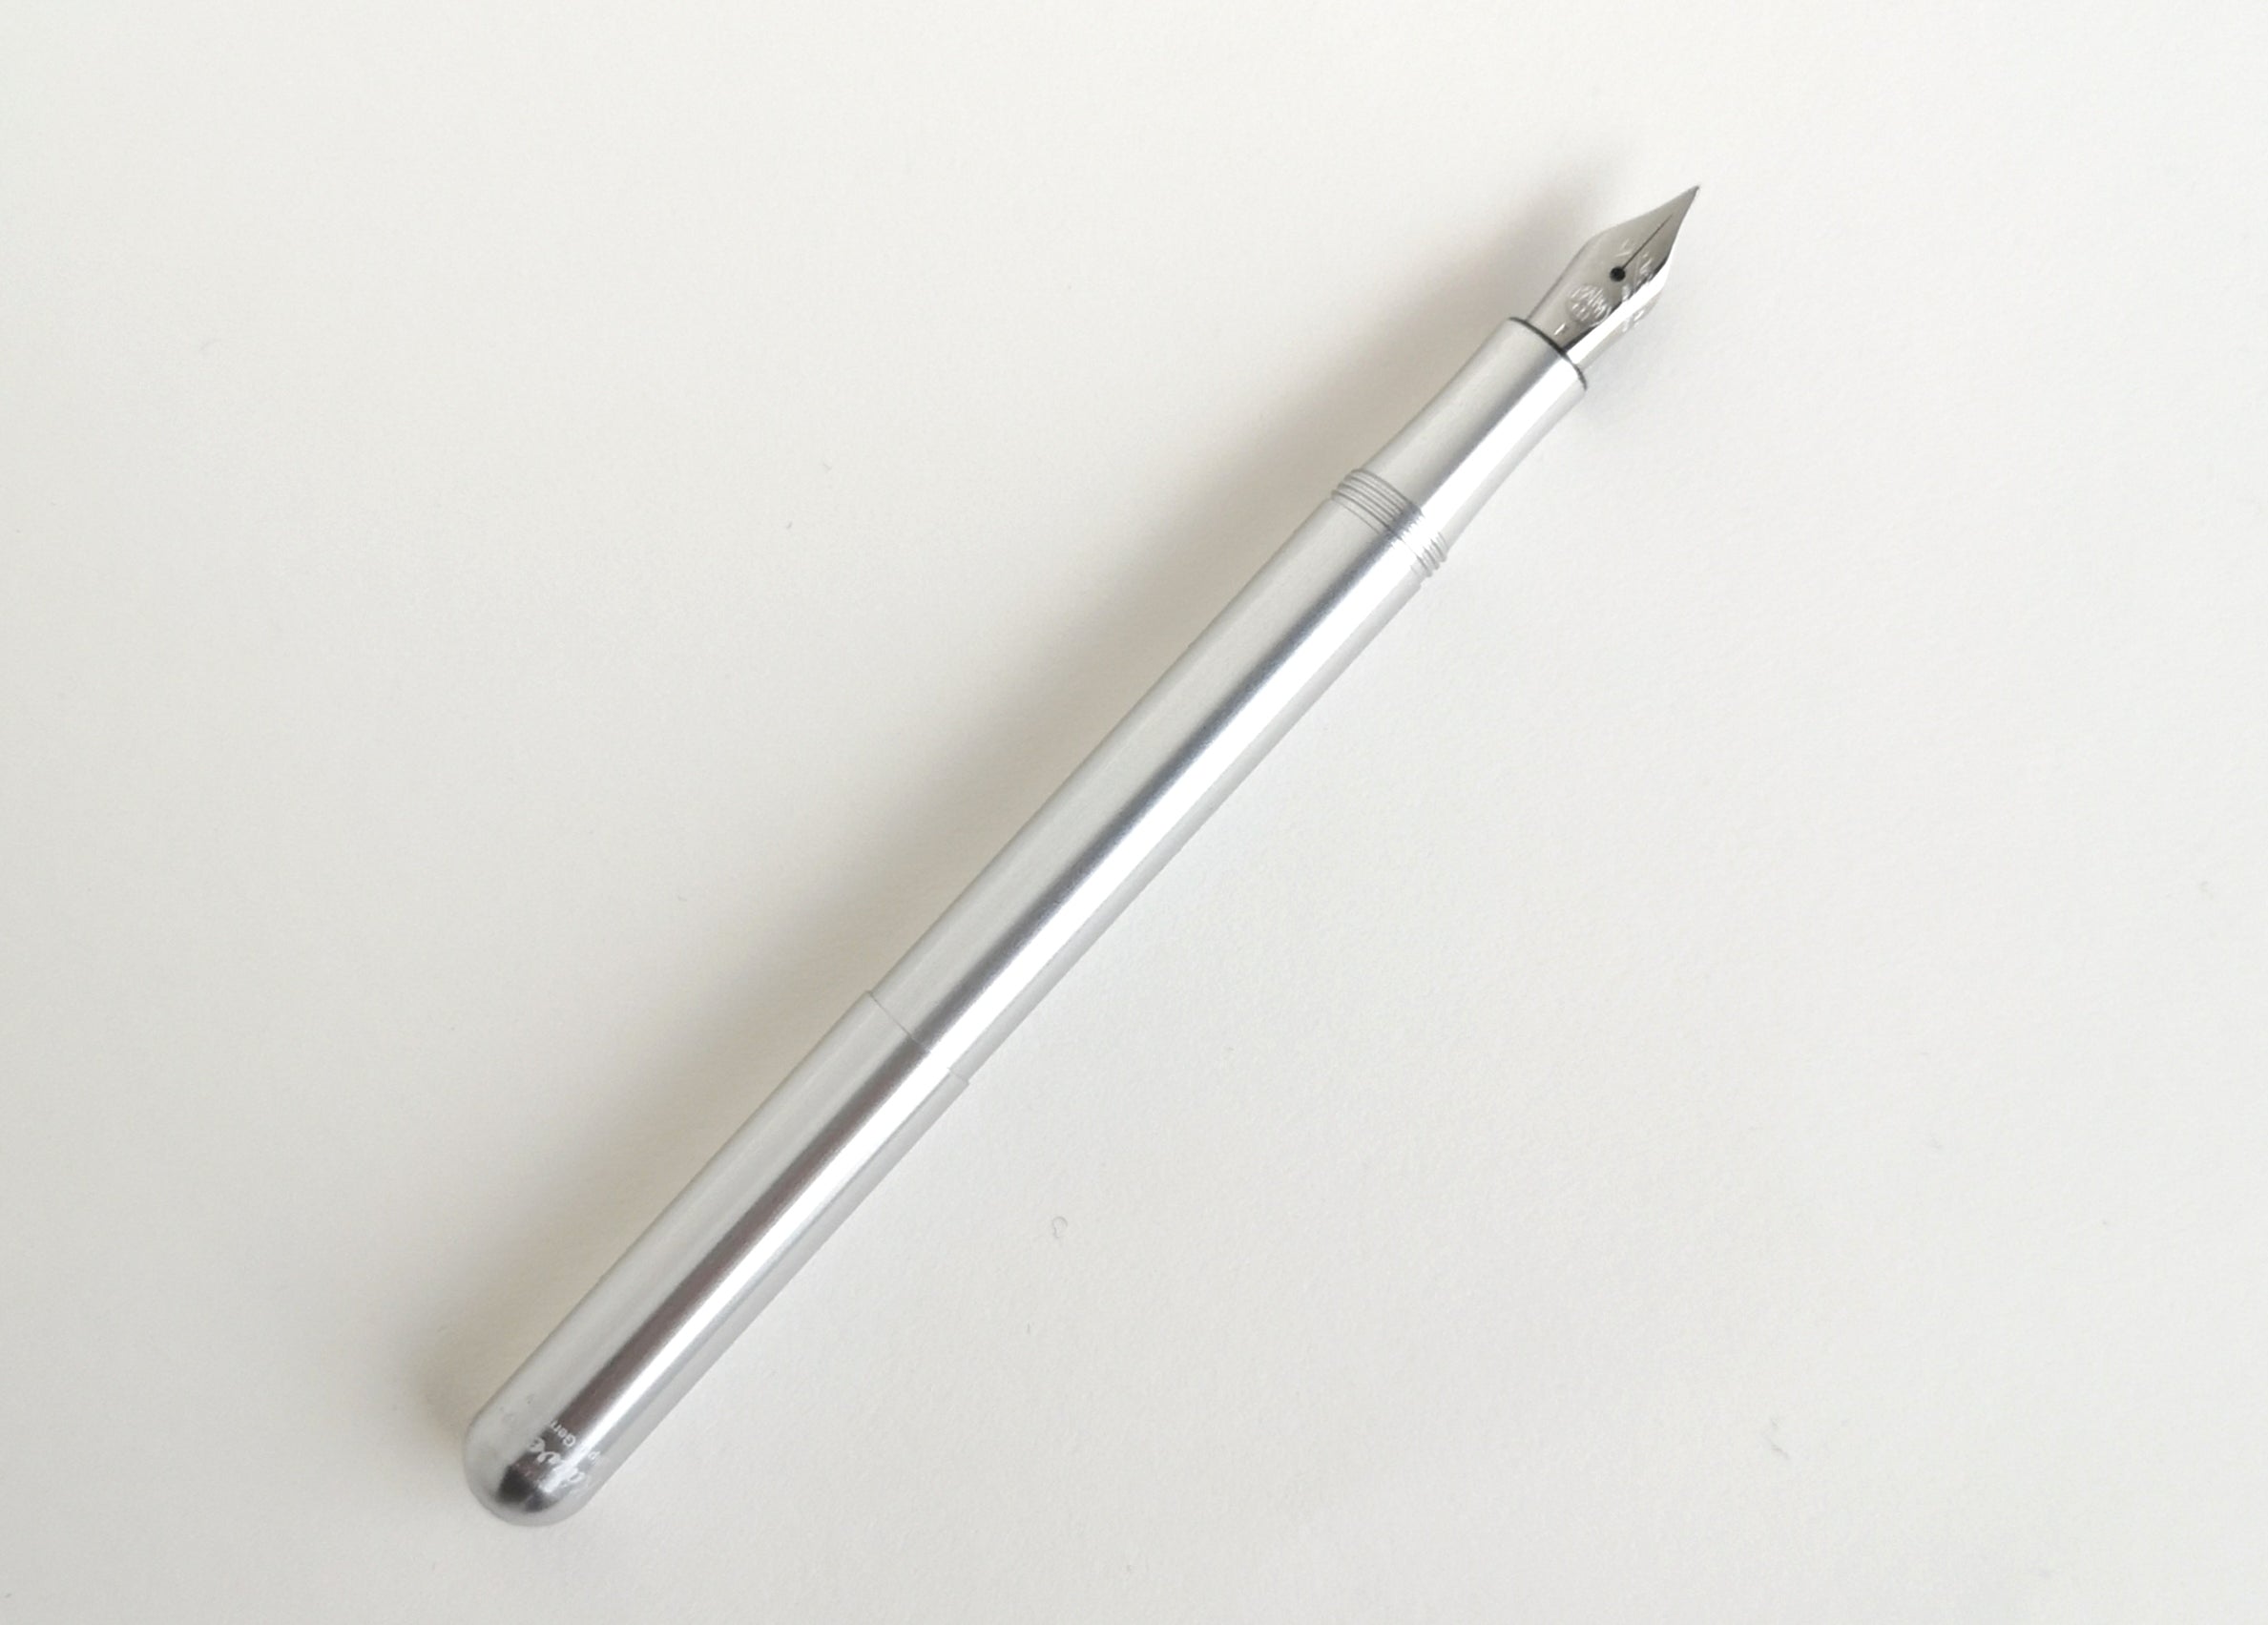 Kaweco Silver Liliput Fountain Pen with cap posted